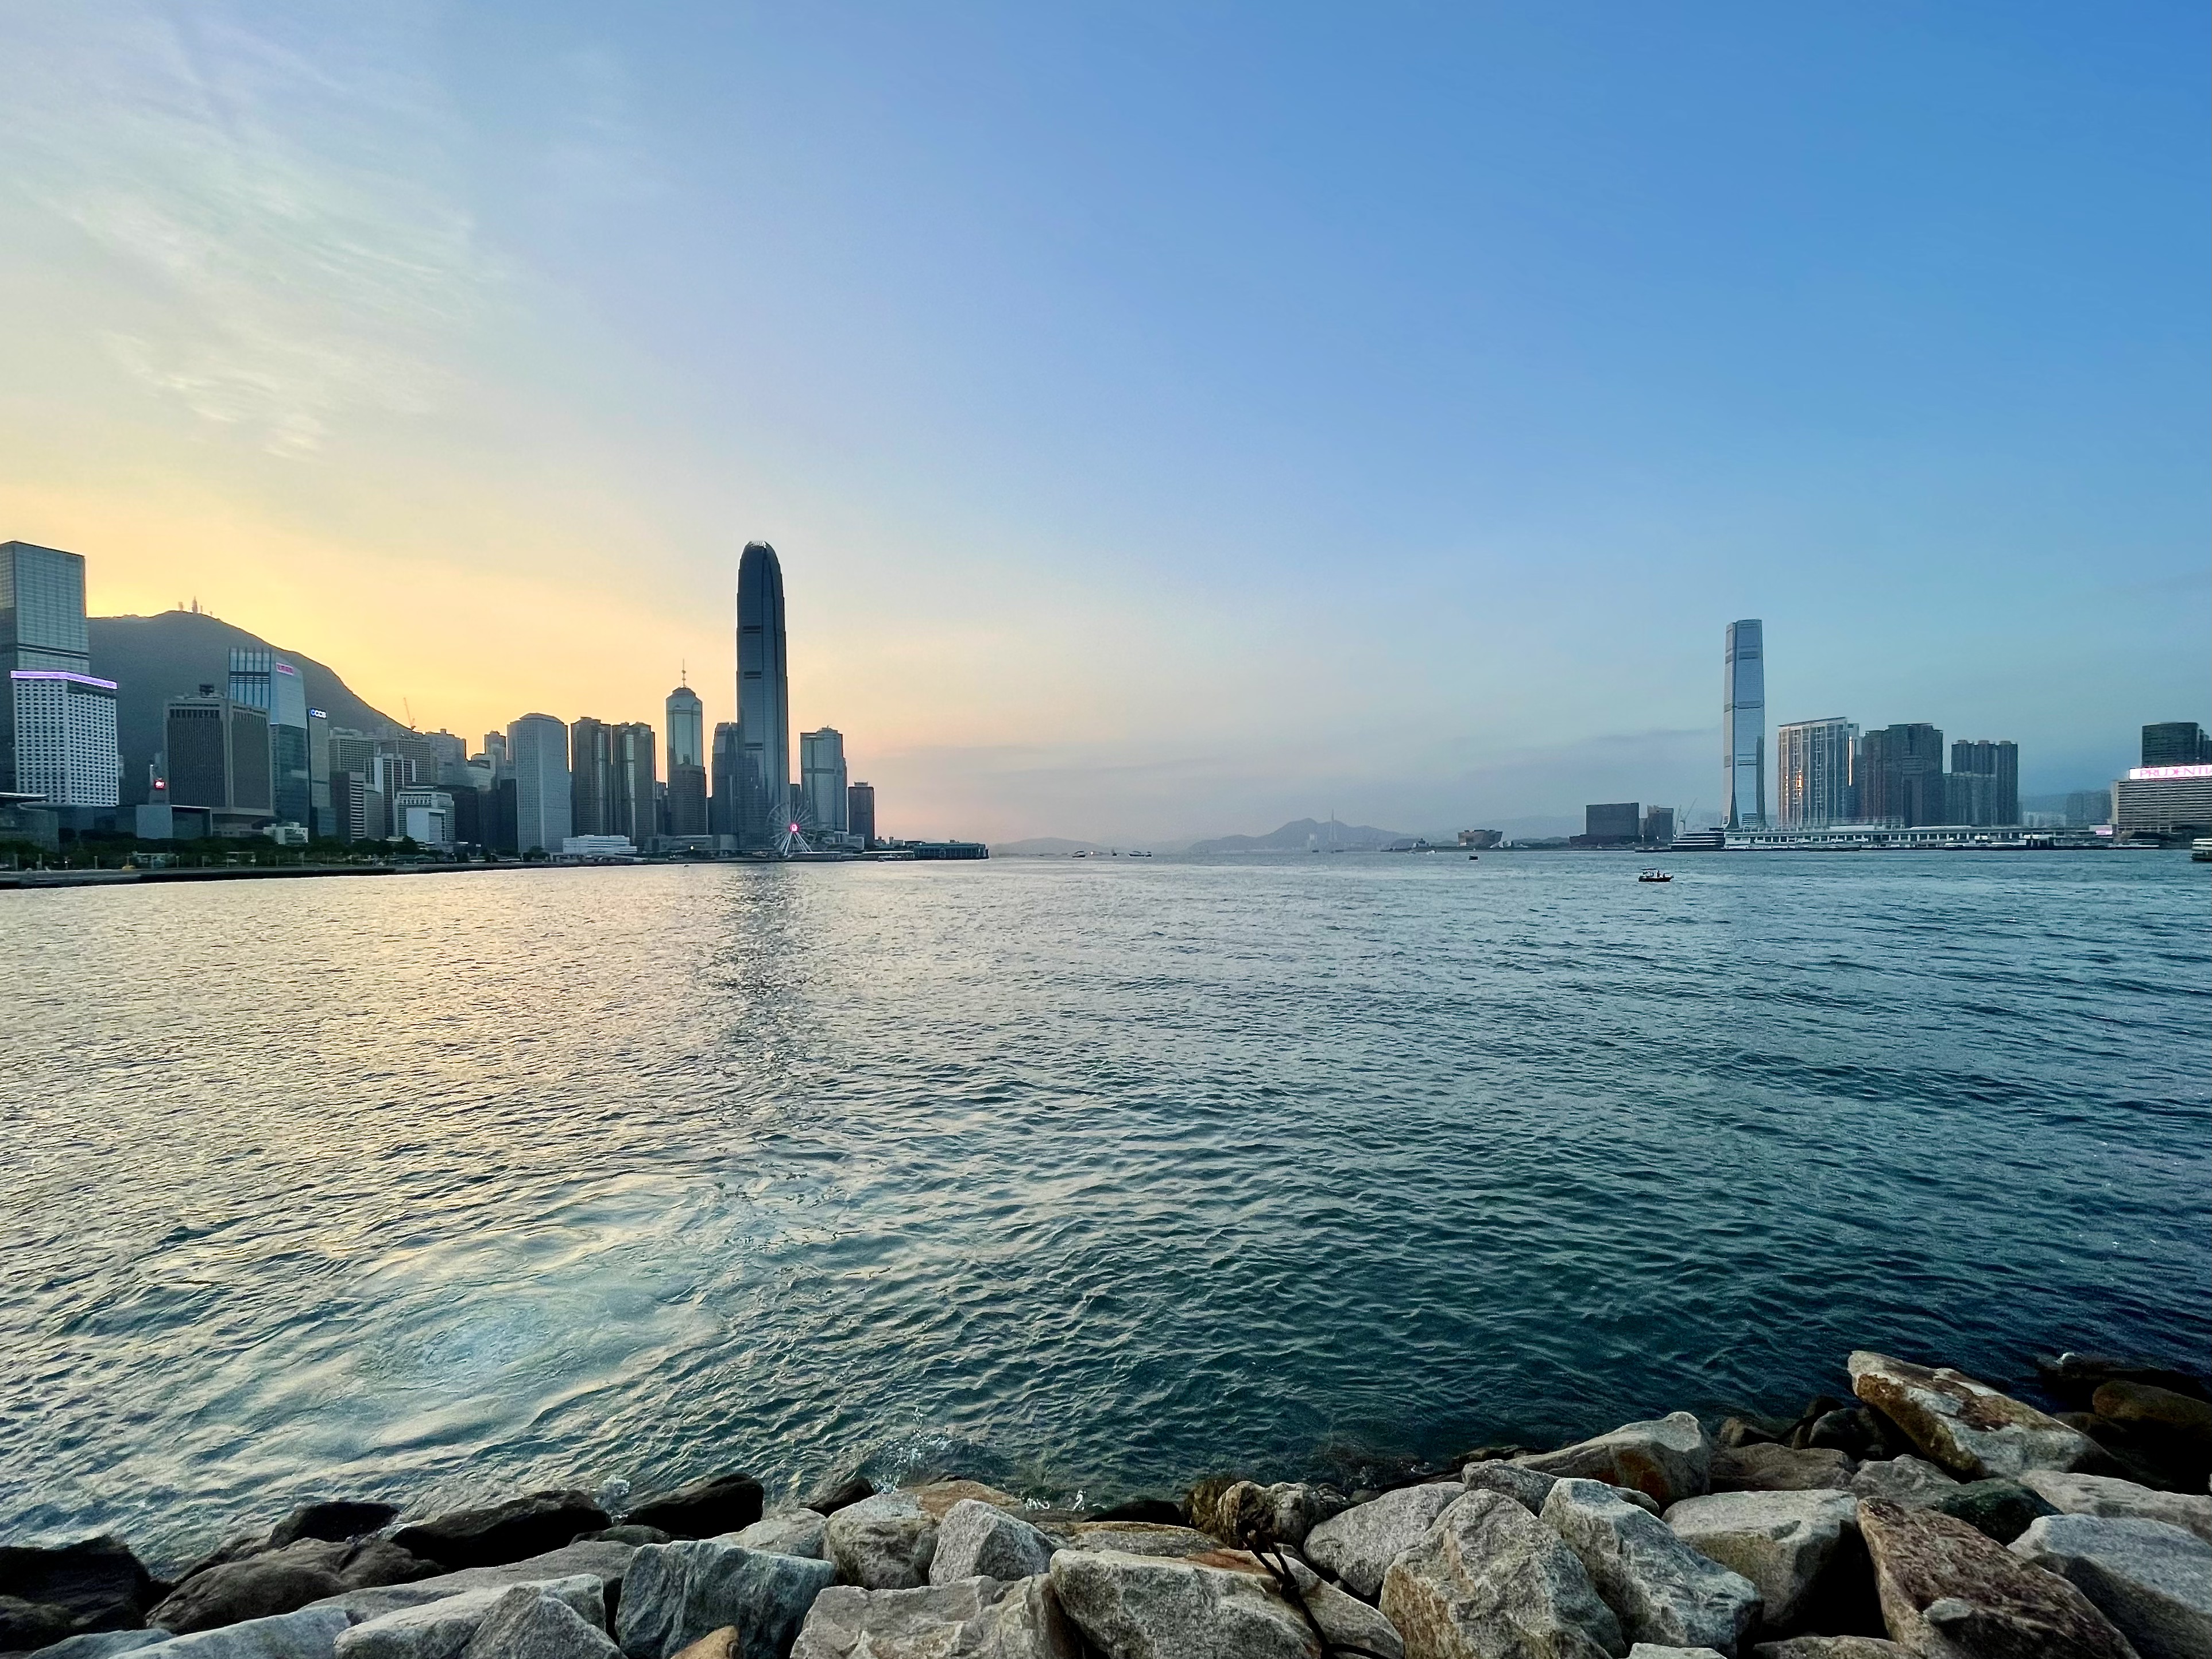 Looking back towards the sunset on Hong Kong’s harbor